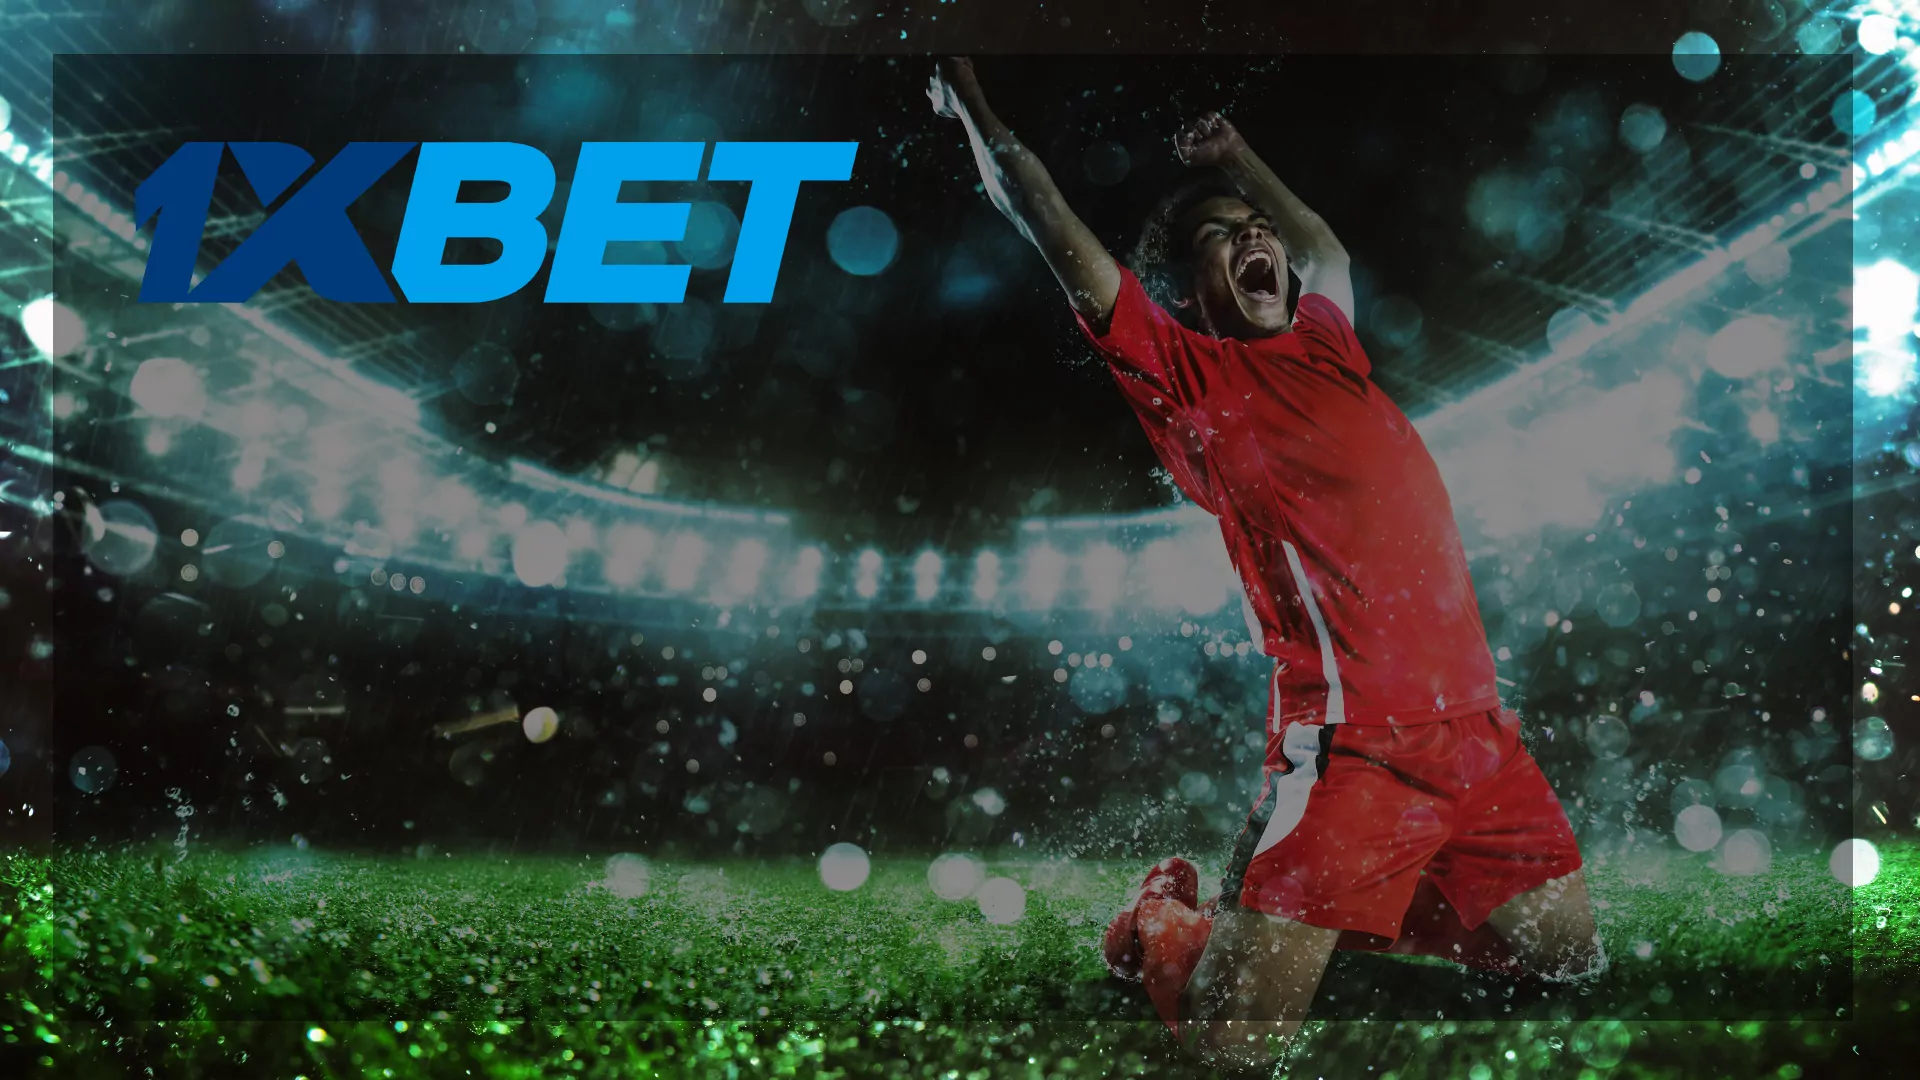 1xBet offers a sports bonus of up to 10,000 rupees for new players from India.